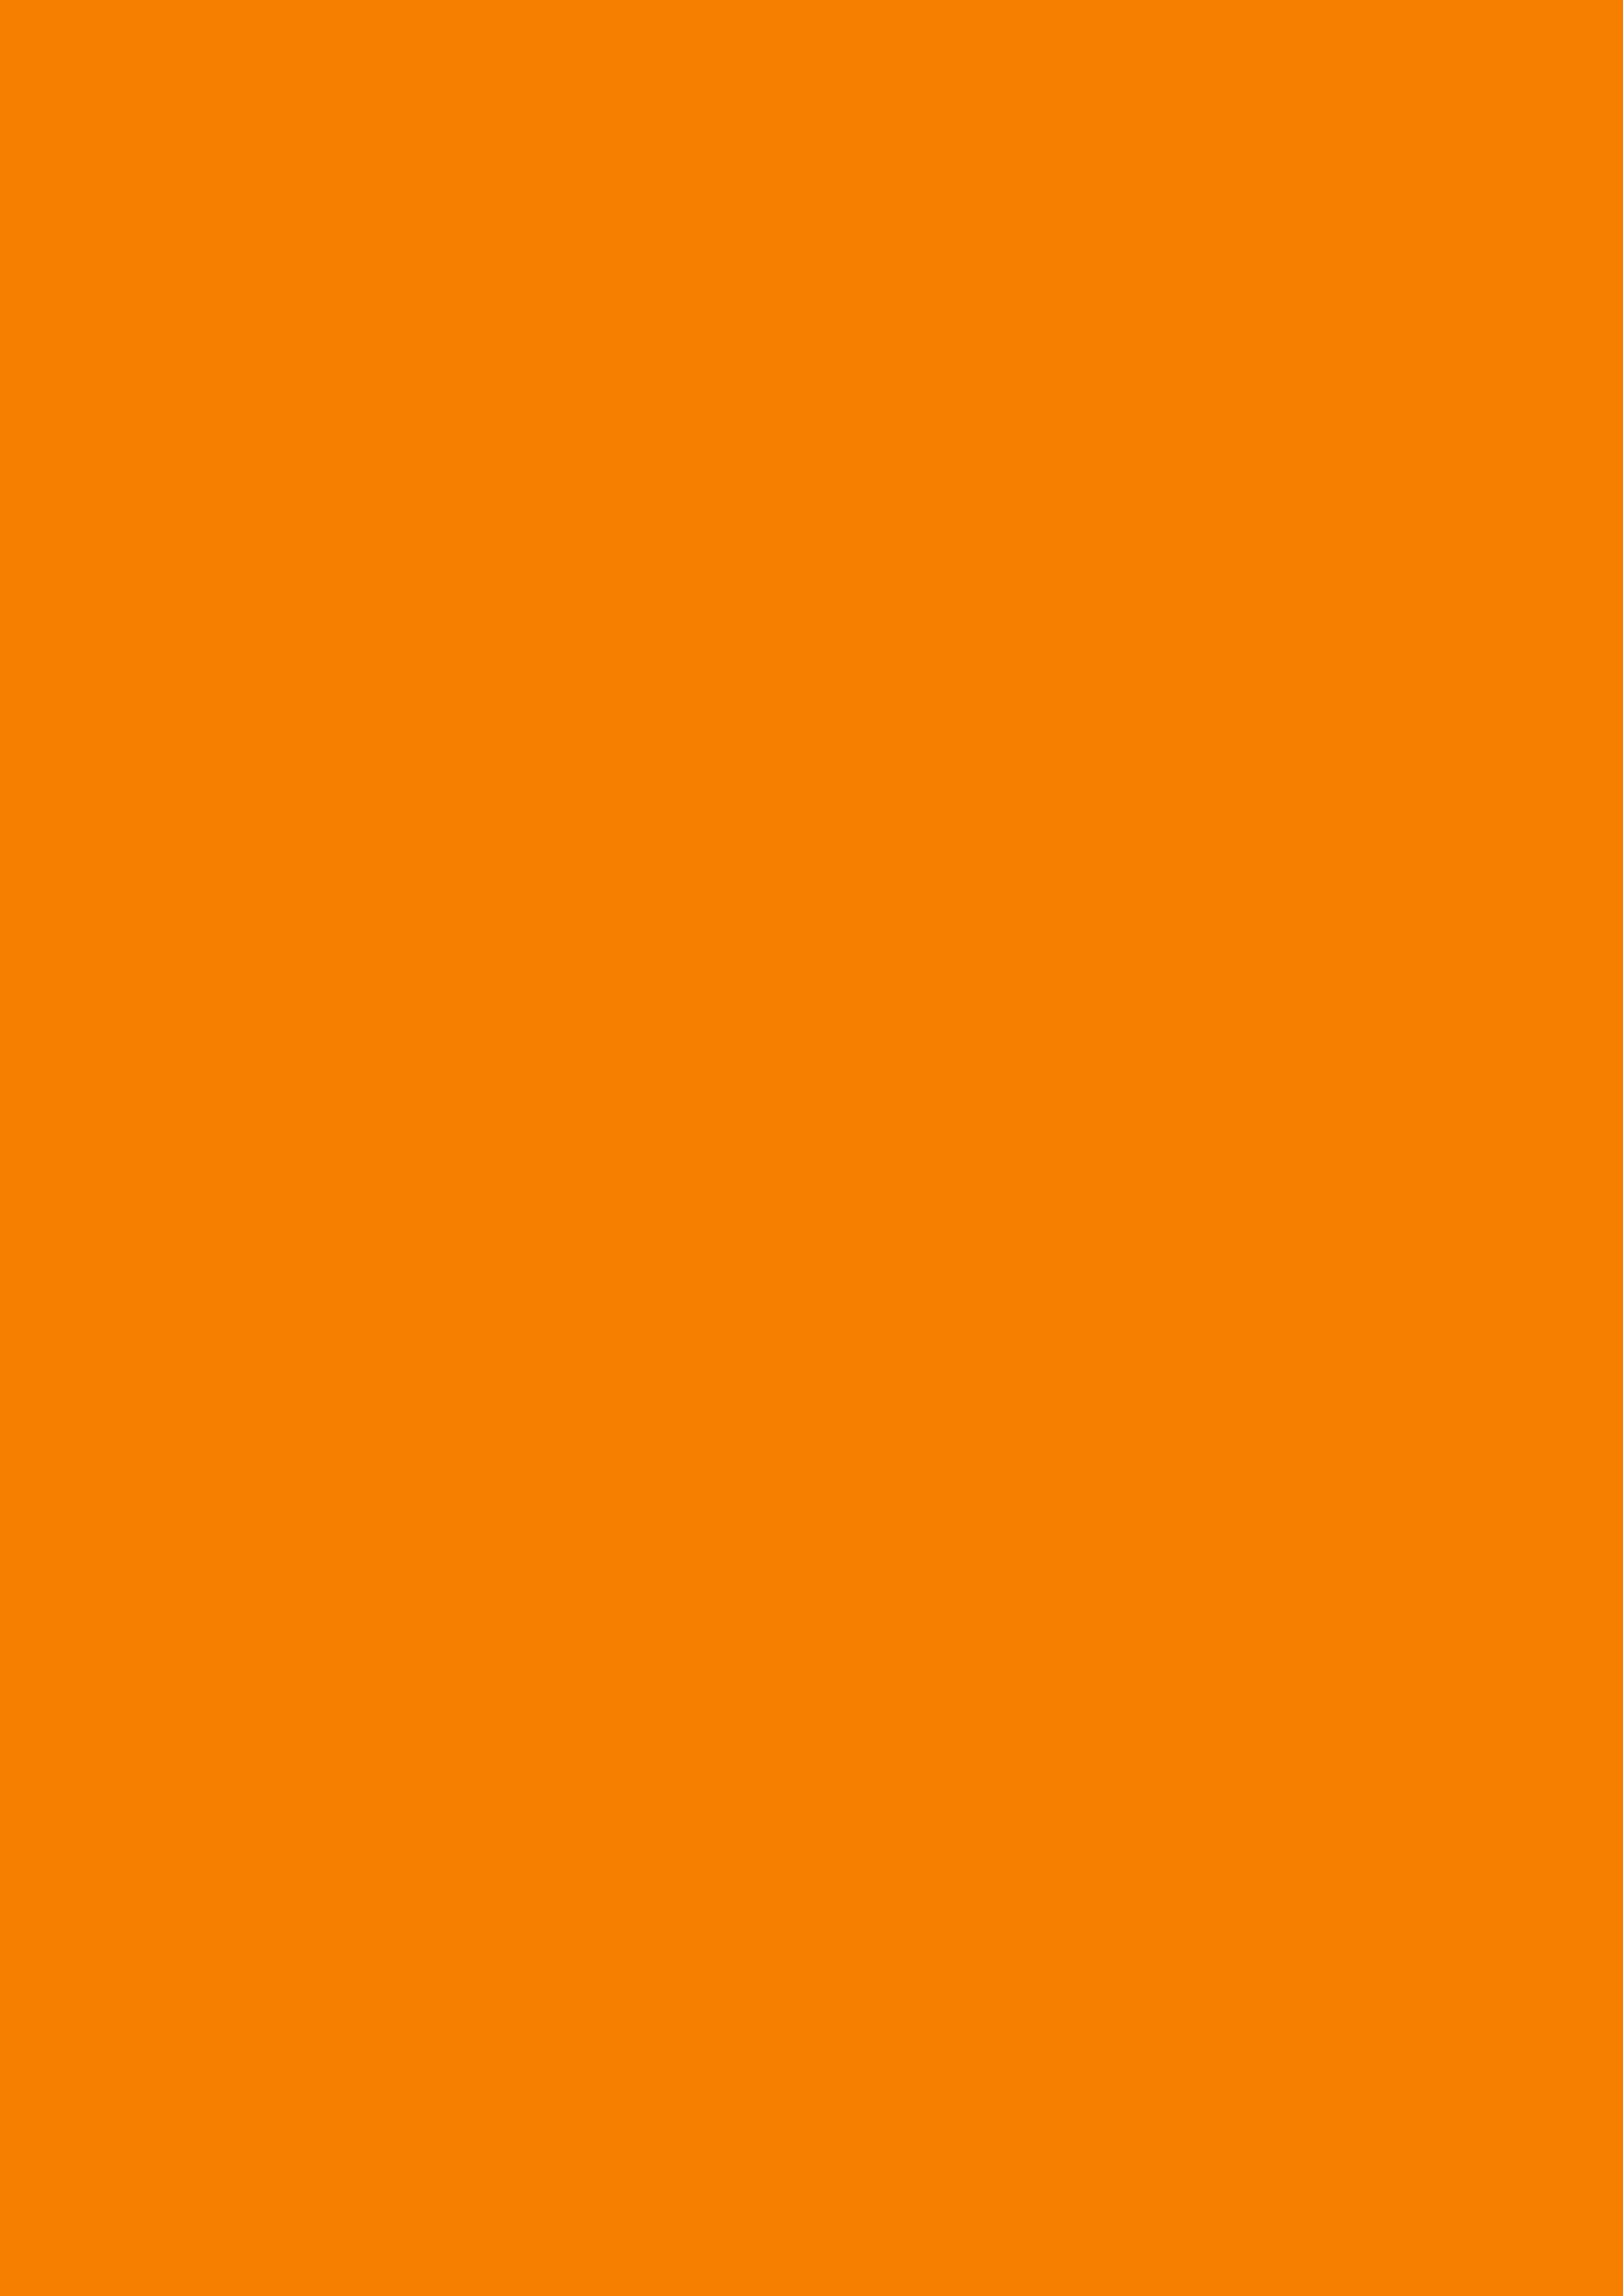 2480x3508 University Of Tennessee Orange Solid Color Background